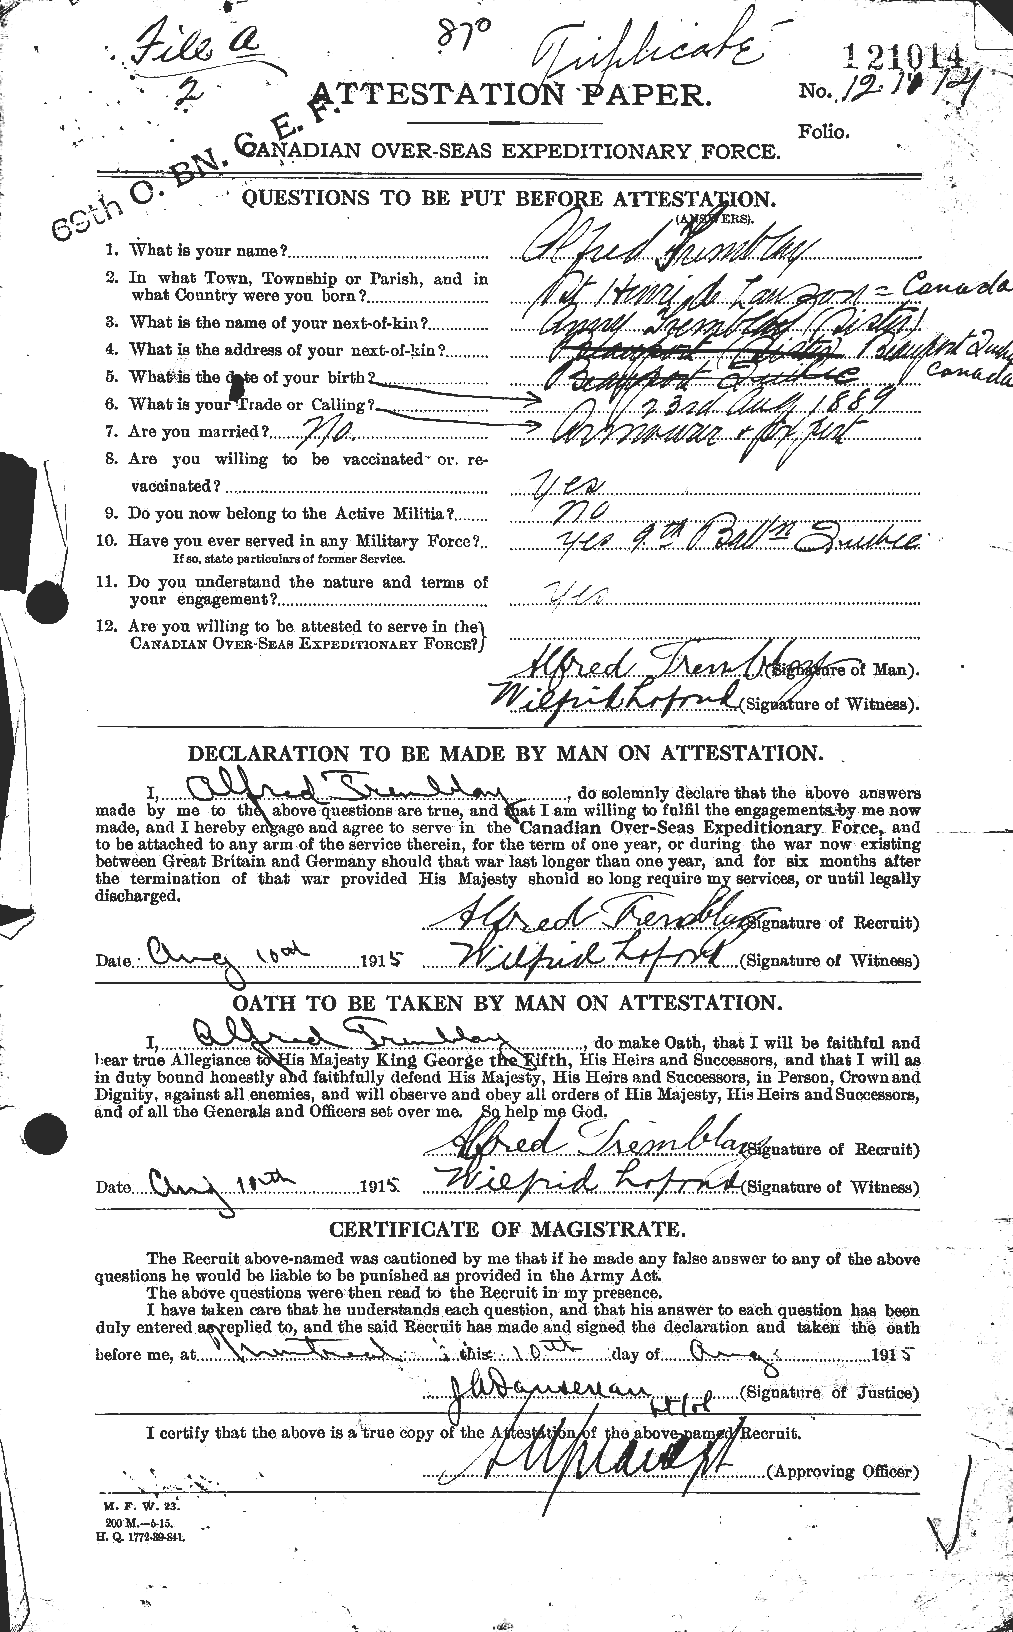 Personnel Records of the First World War - CEF 638912a